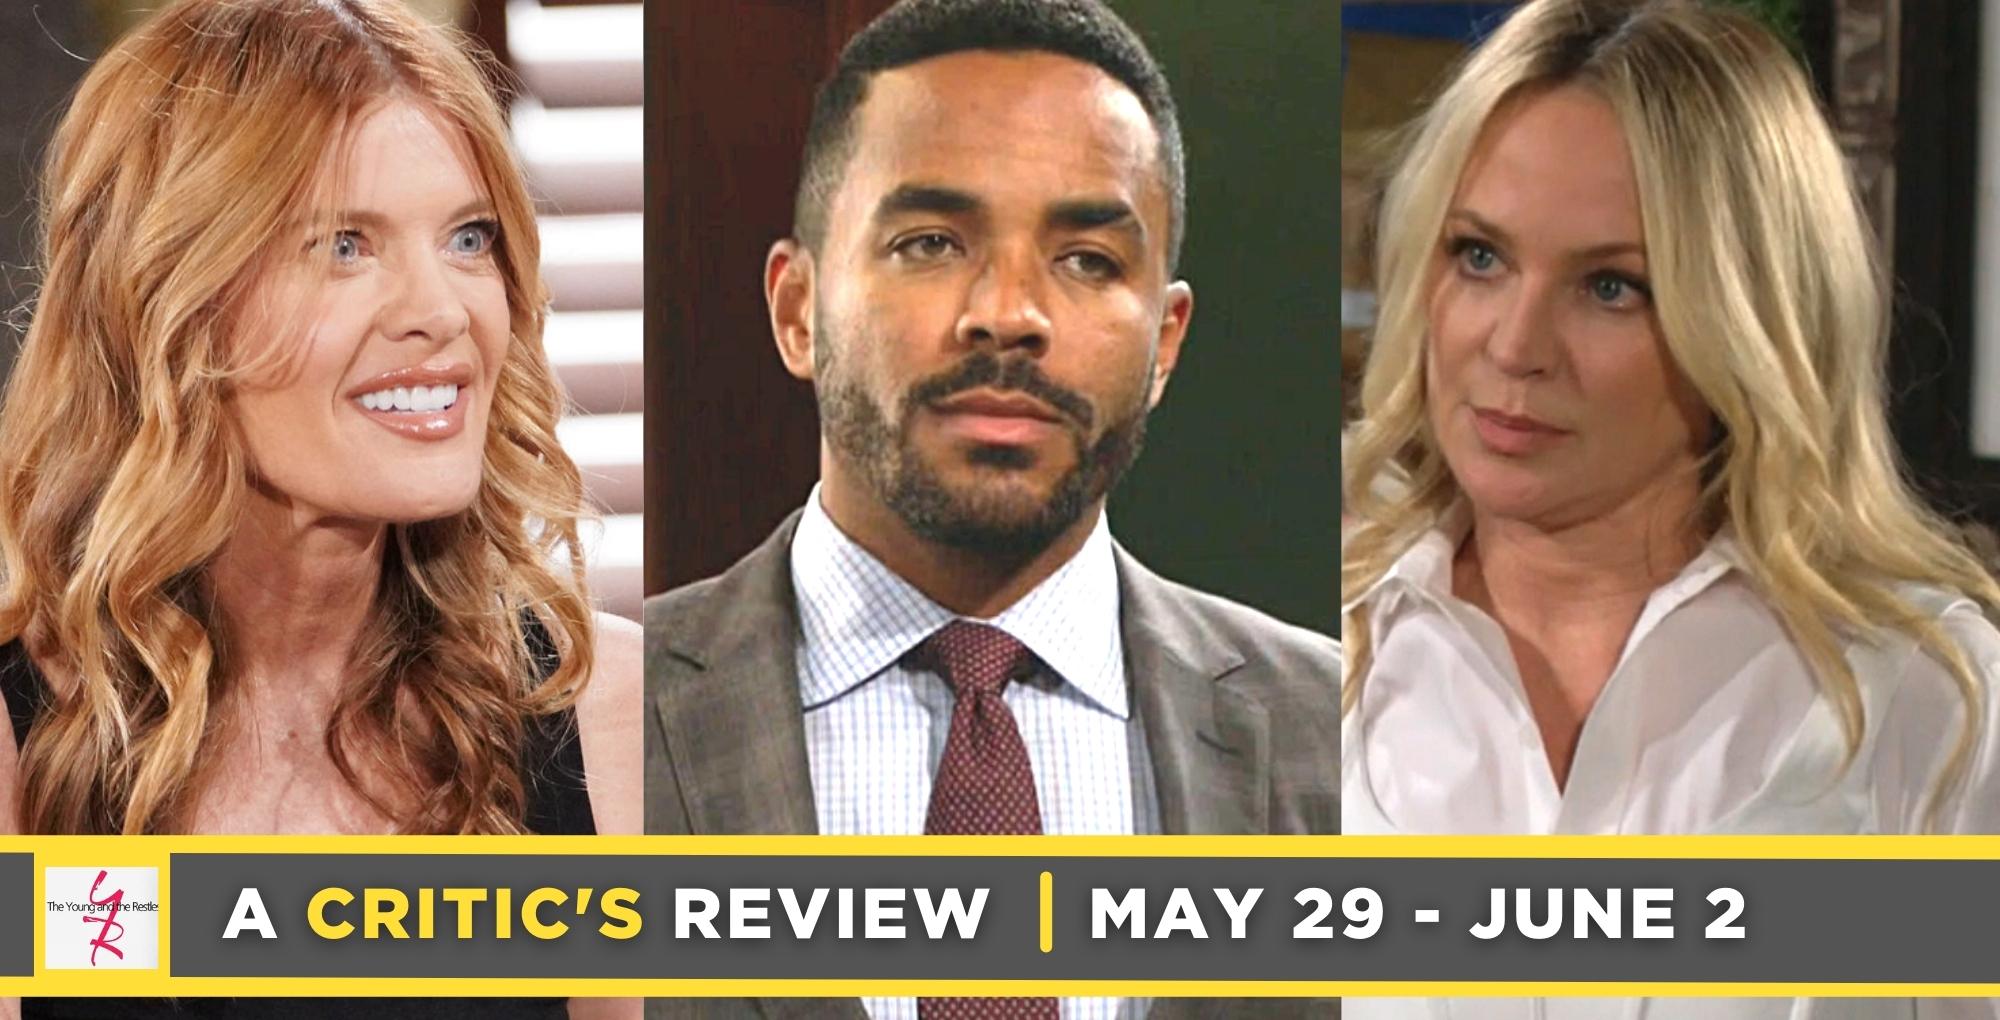 the young and the restless critic's review for may 29 – june 2, 2023. three images phyllis, nate, and sharon.